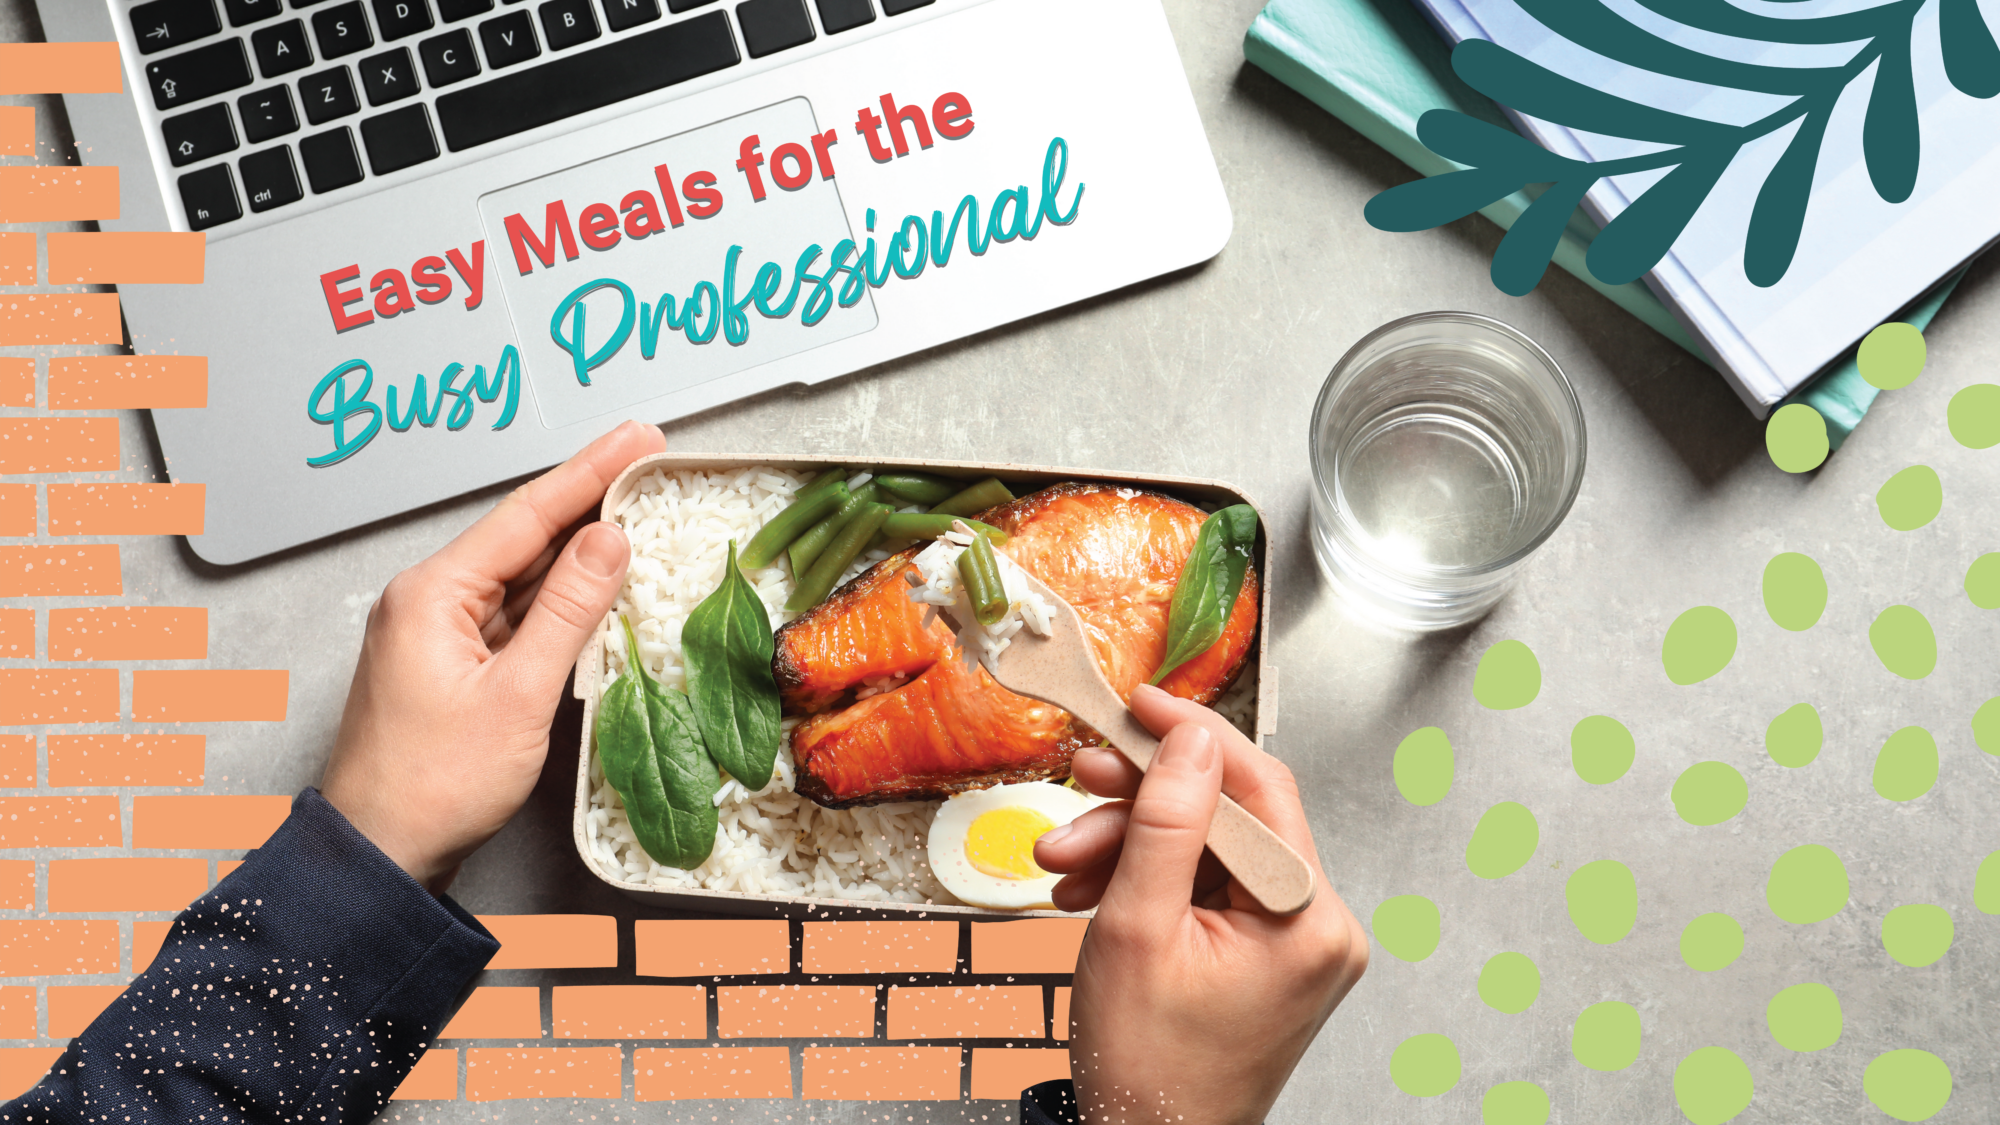 A delightful box of food is held next to a laptop and notebook "Easy Meals for the Busy Professional"